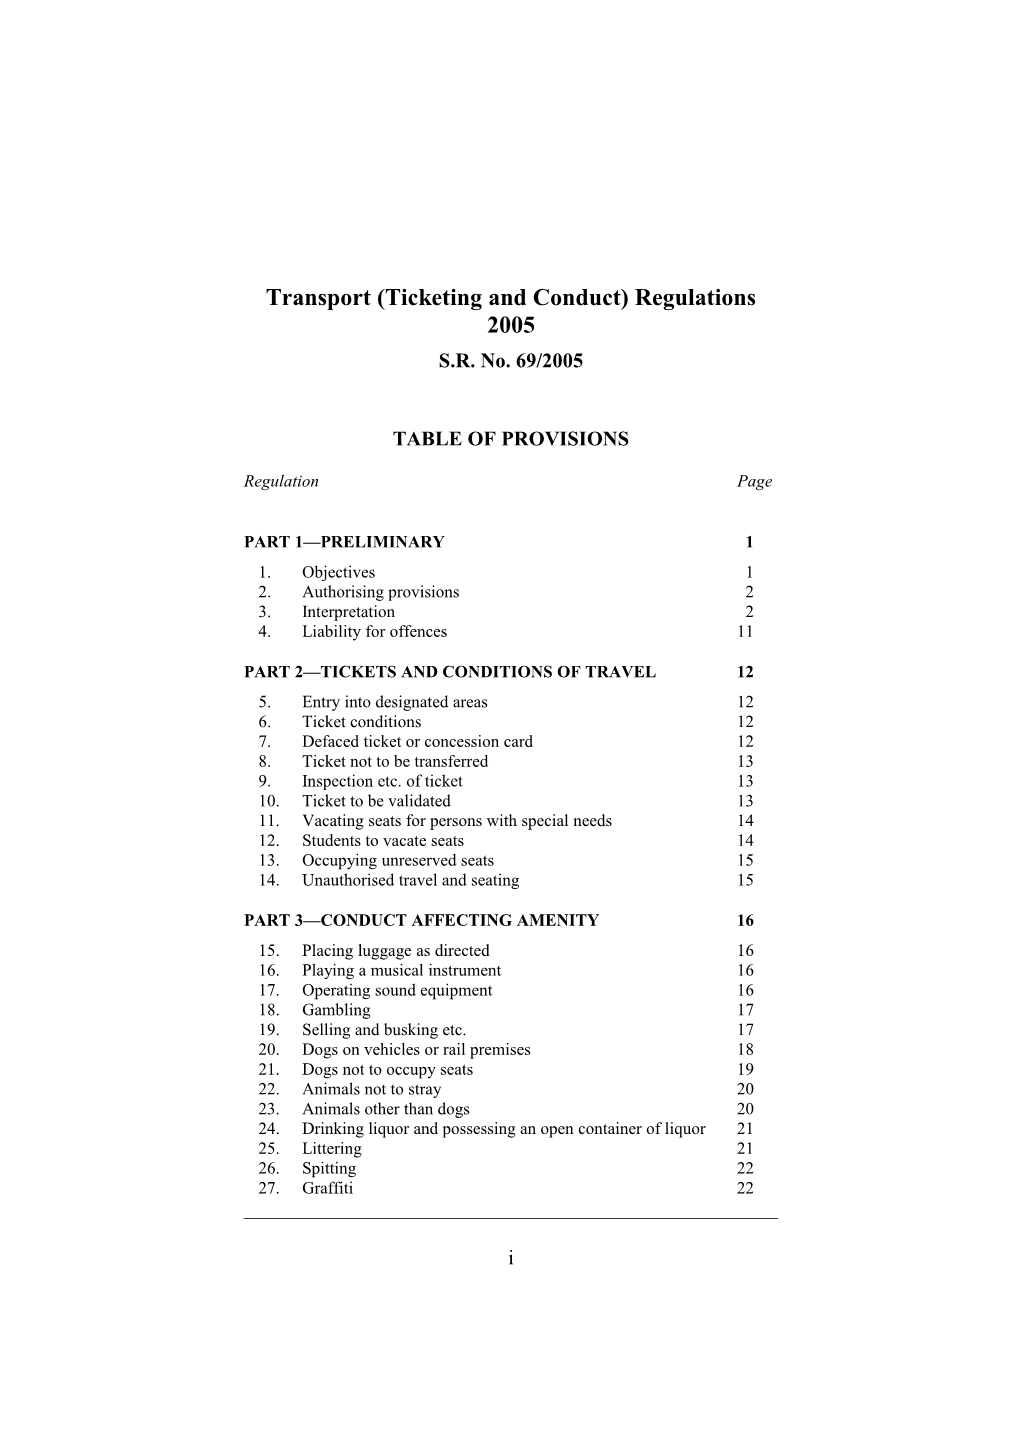 Transport (Ticketing and Conduct) Regulations 2005